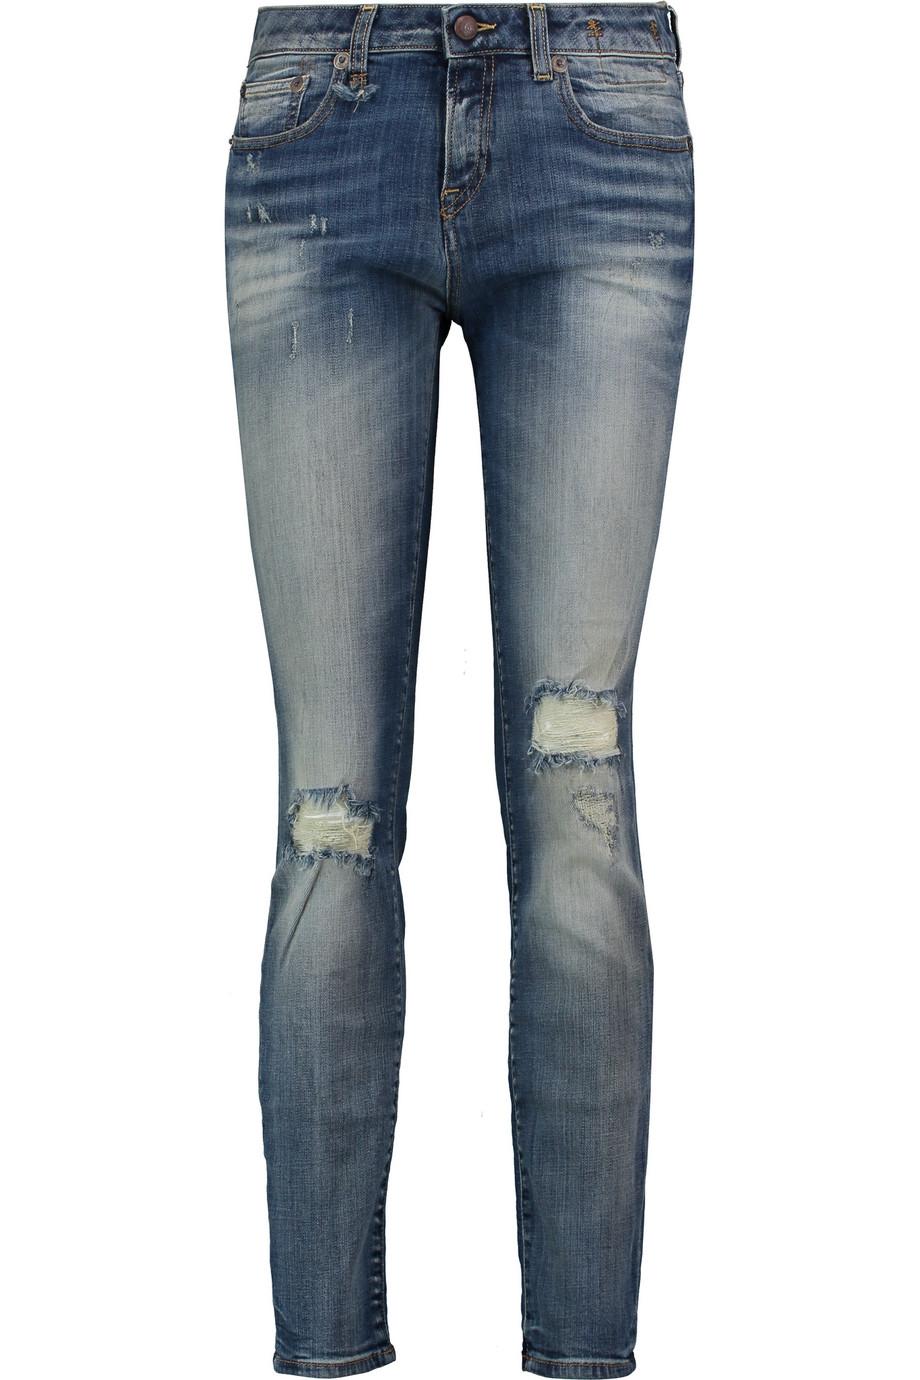 R13 Alison Faded Distressed Mid-rise Skinny Jeans | ModeSens